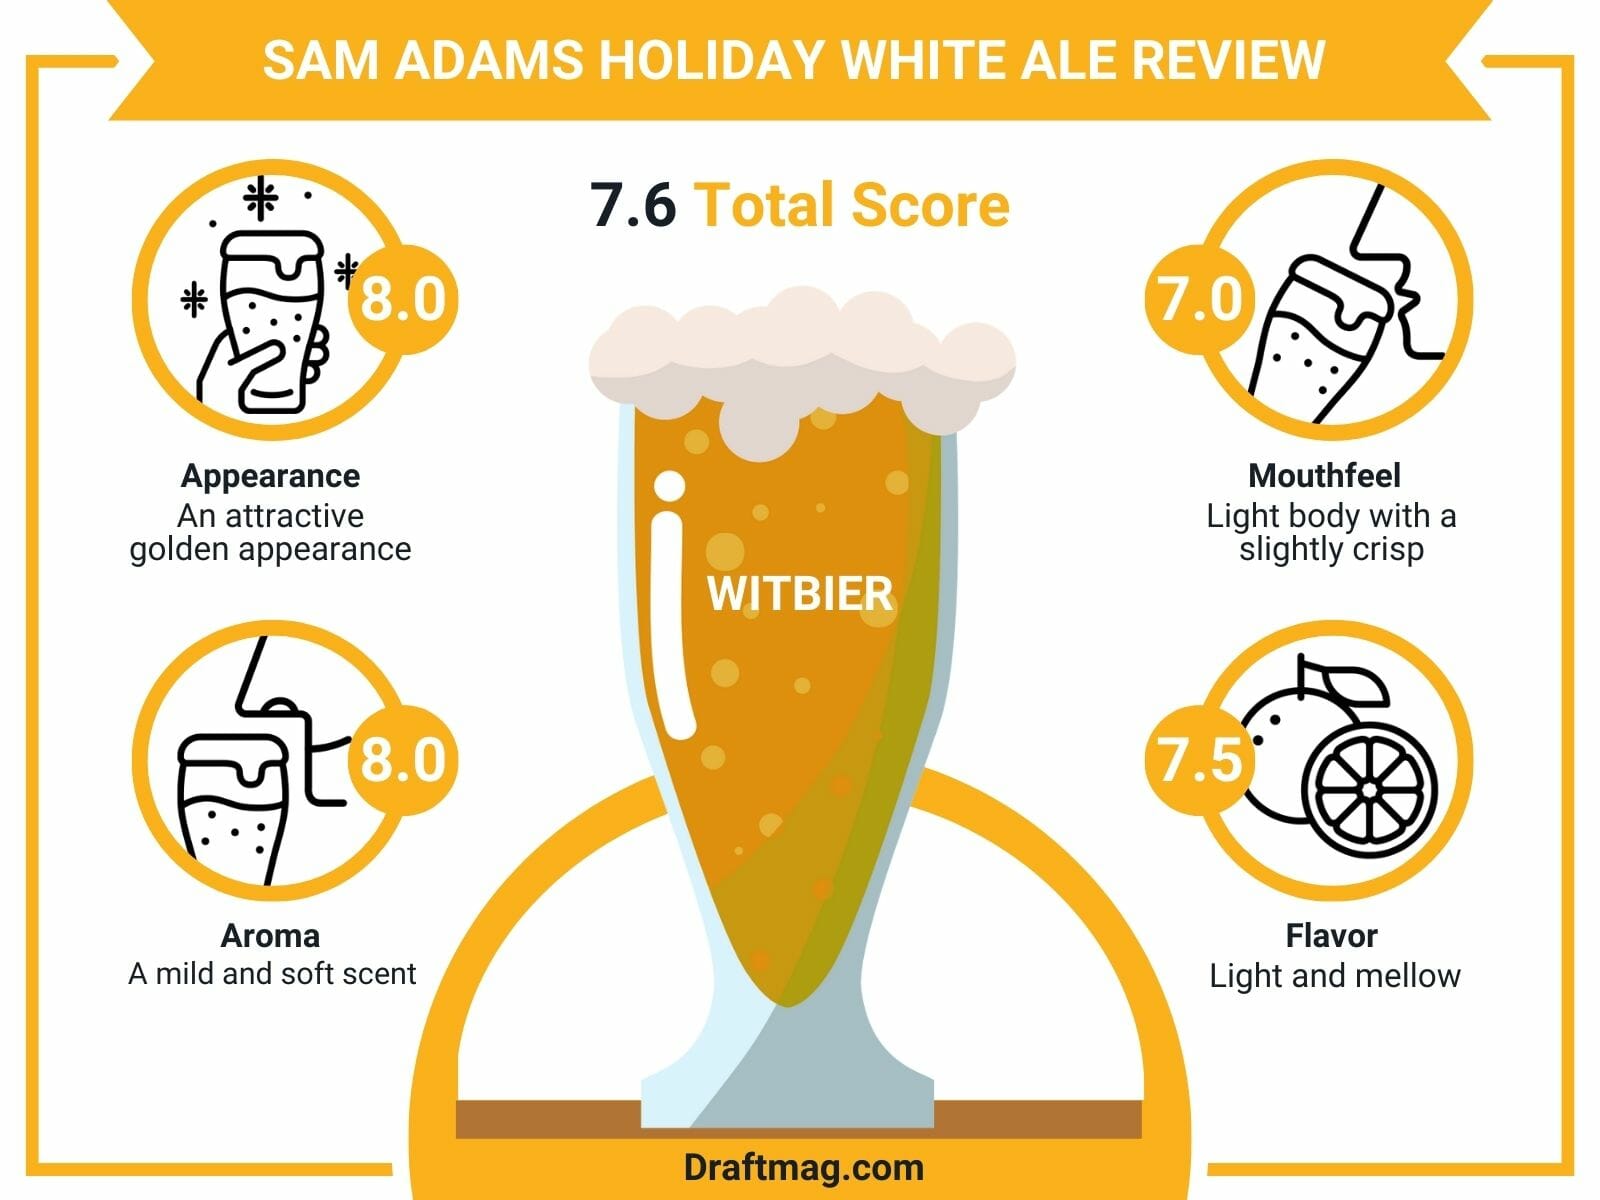 Sam Adams Holiday White Ale Review Infographic